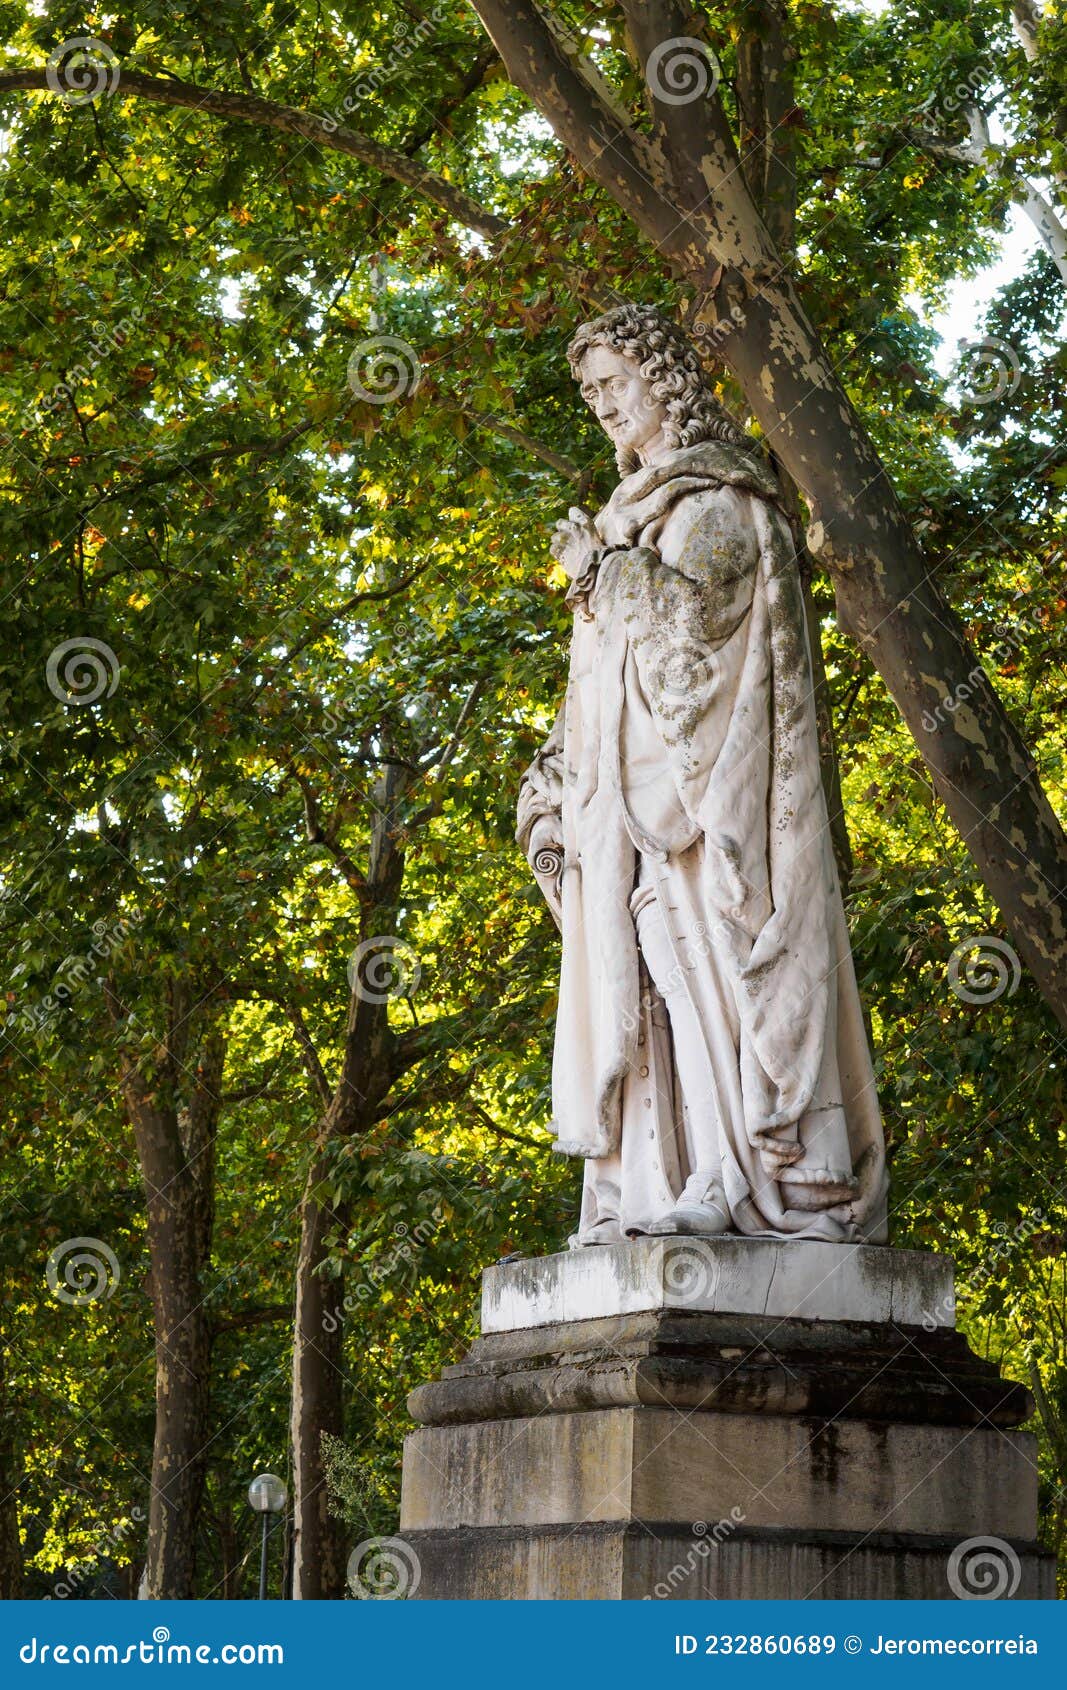 statue of montesquieu in the garden of the place des quinconces in bordeaux